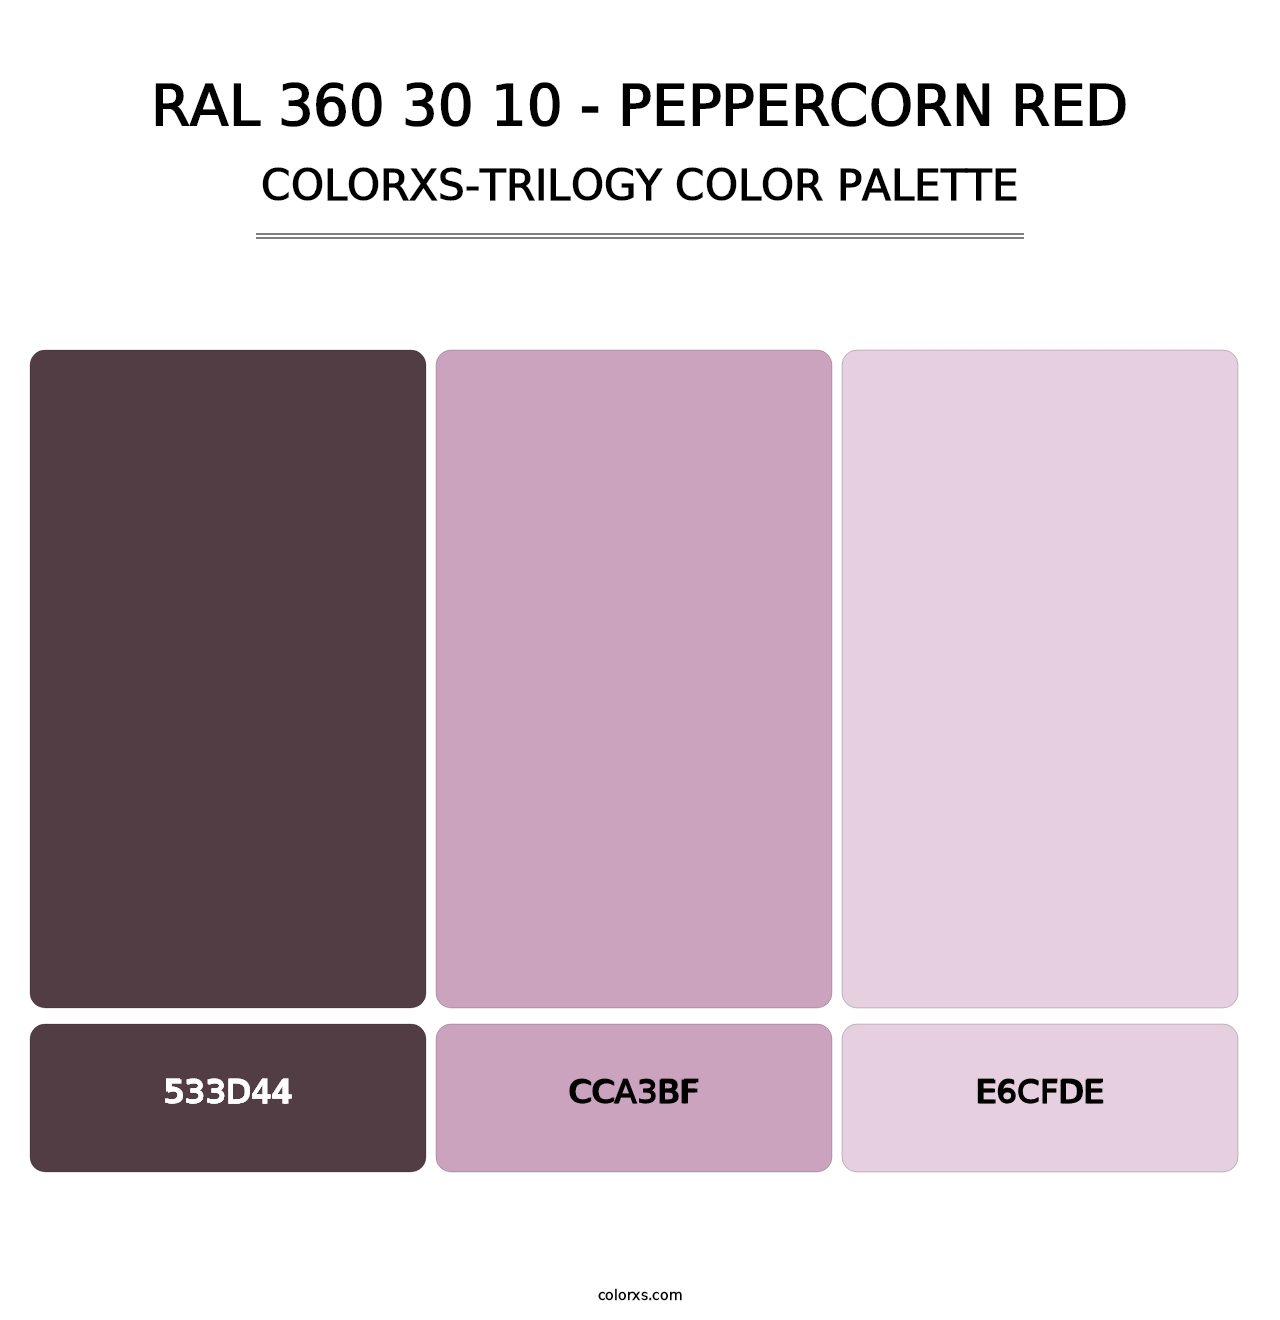 RAL 360 30 10 - Peppercorn Red - Colorxs Trilogy Palette